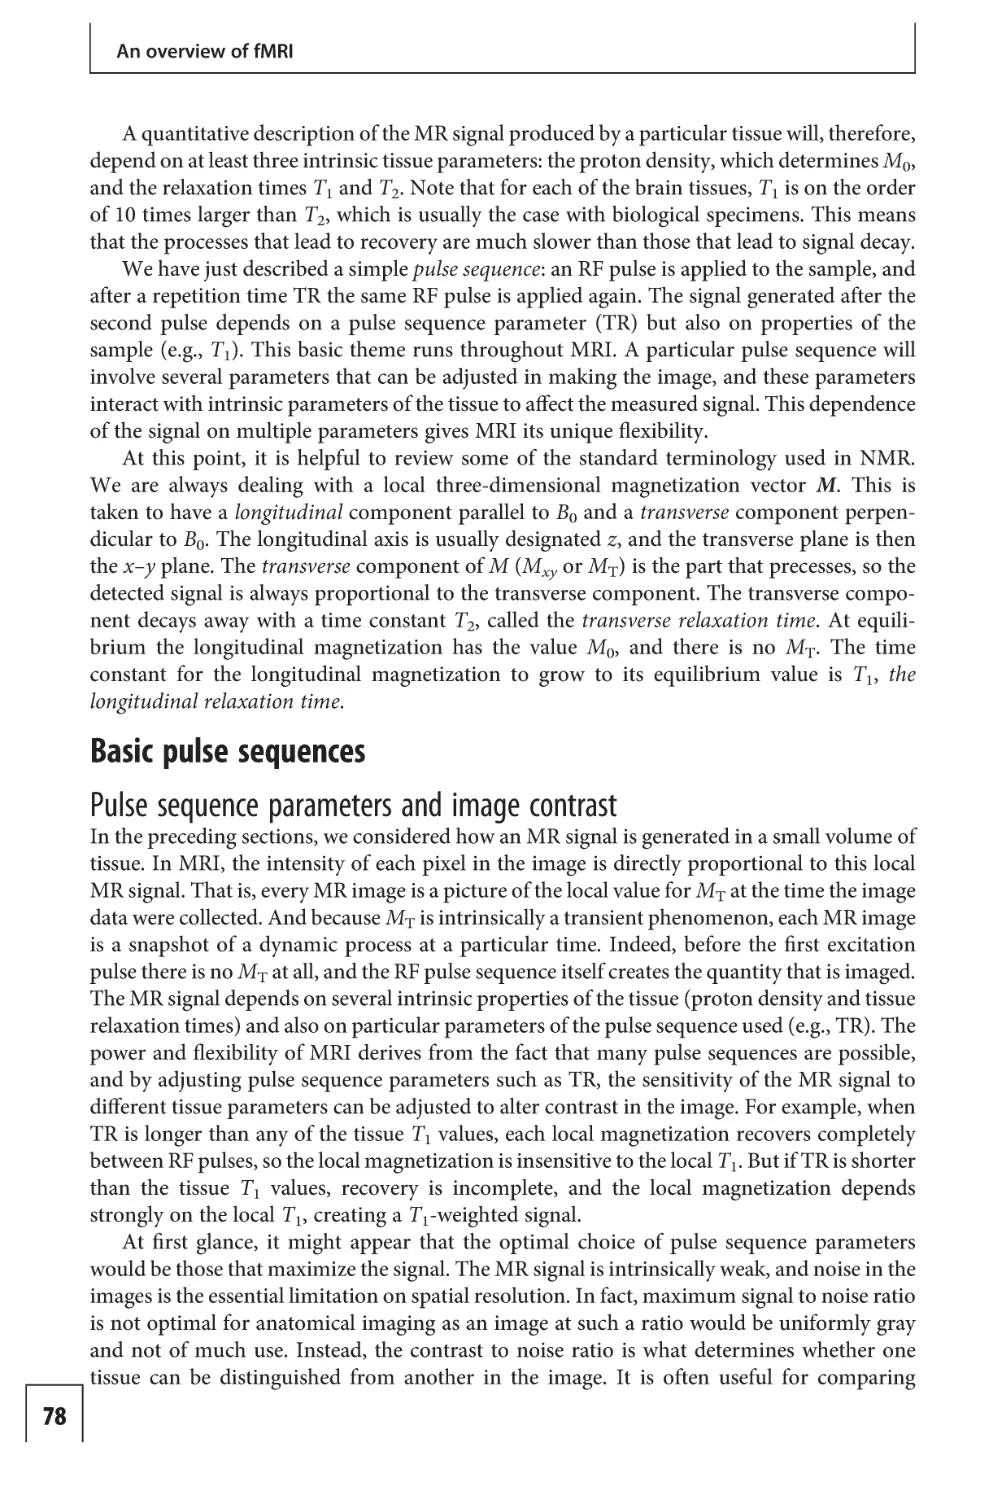 Basic pulse sequences
Pulse sequence parameters and image contrast